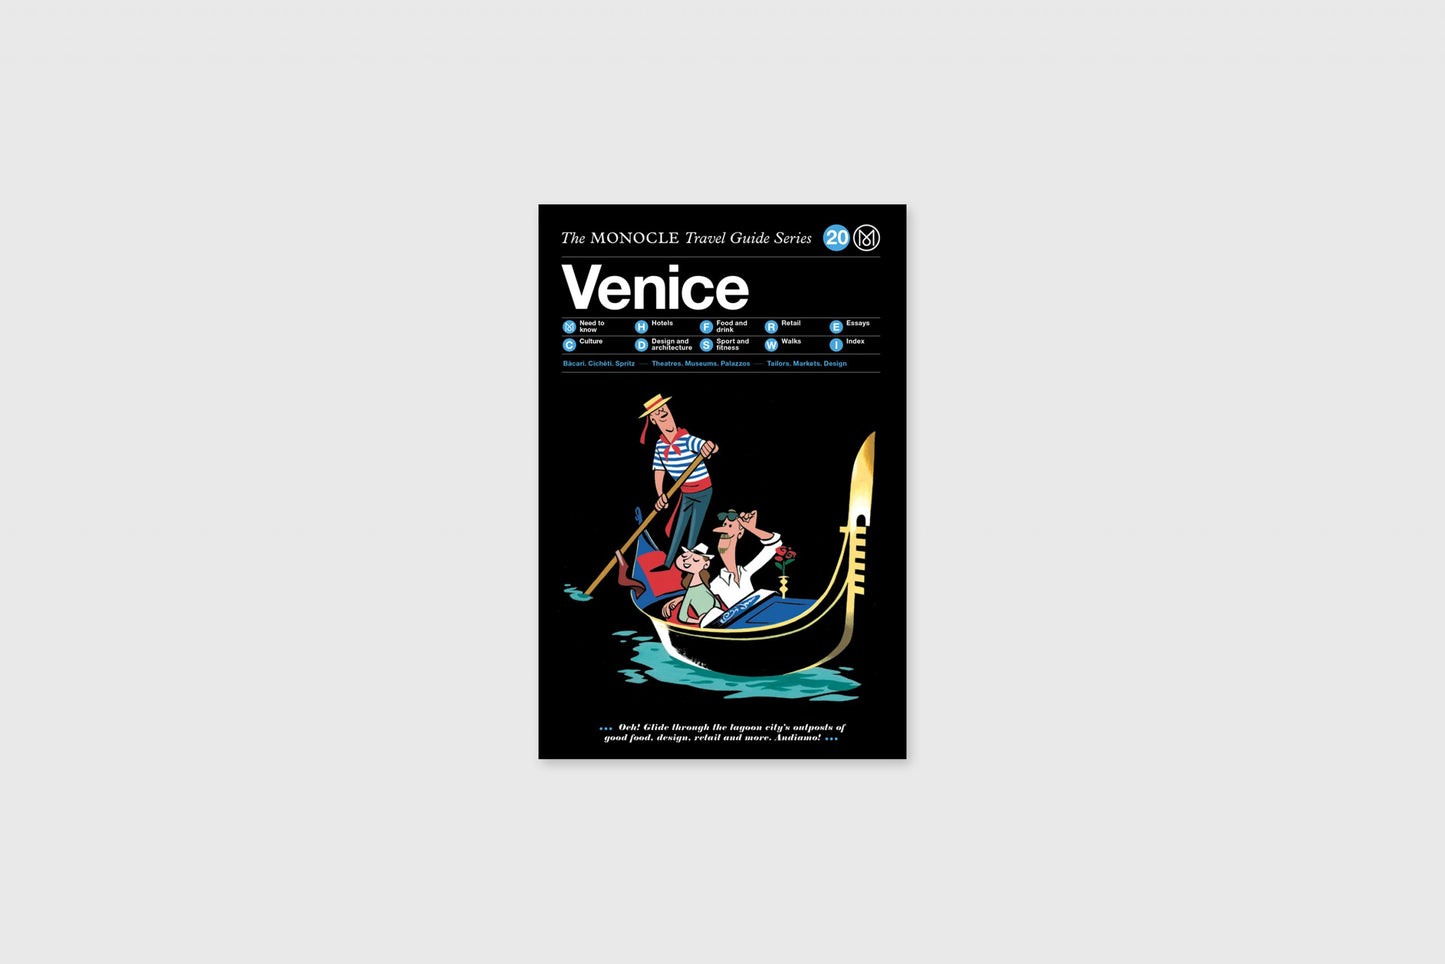 Venice: The Monocle Travel Guide Series